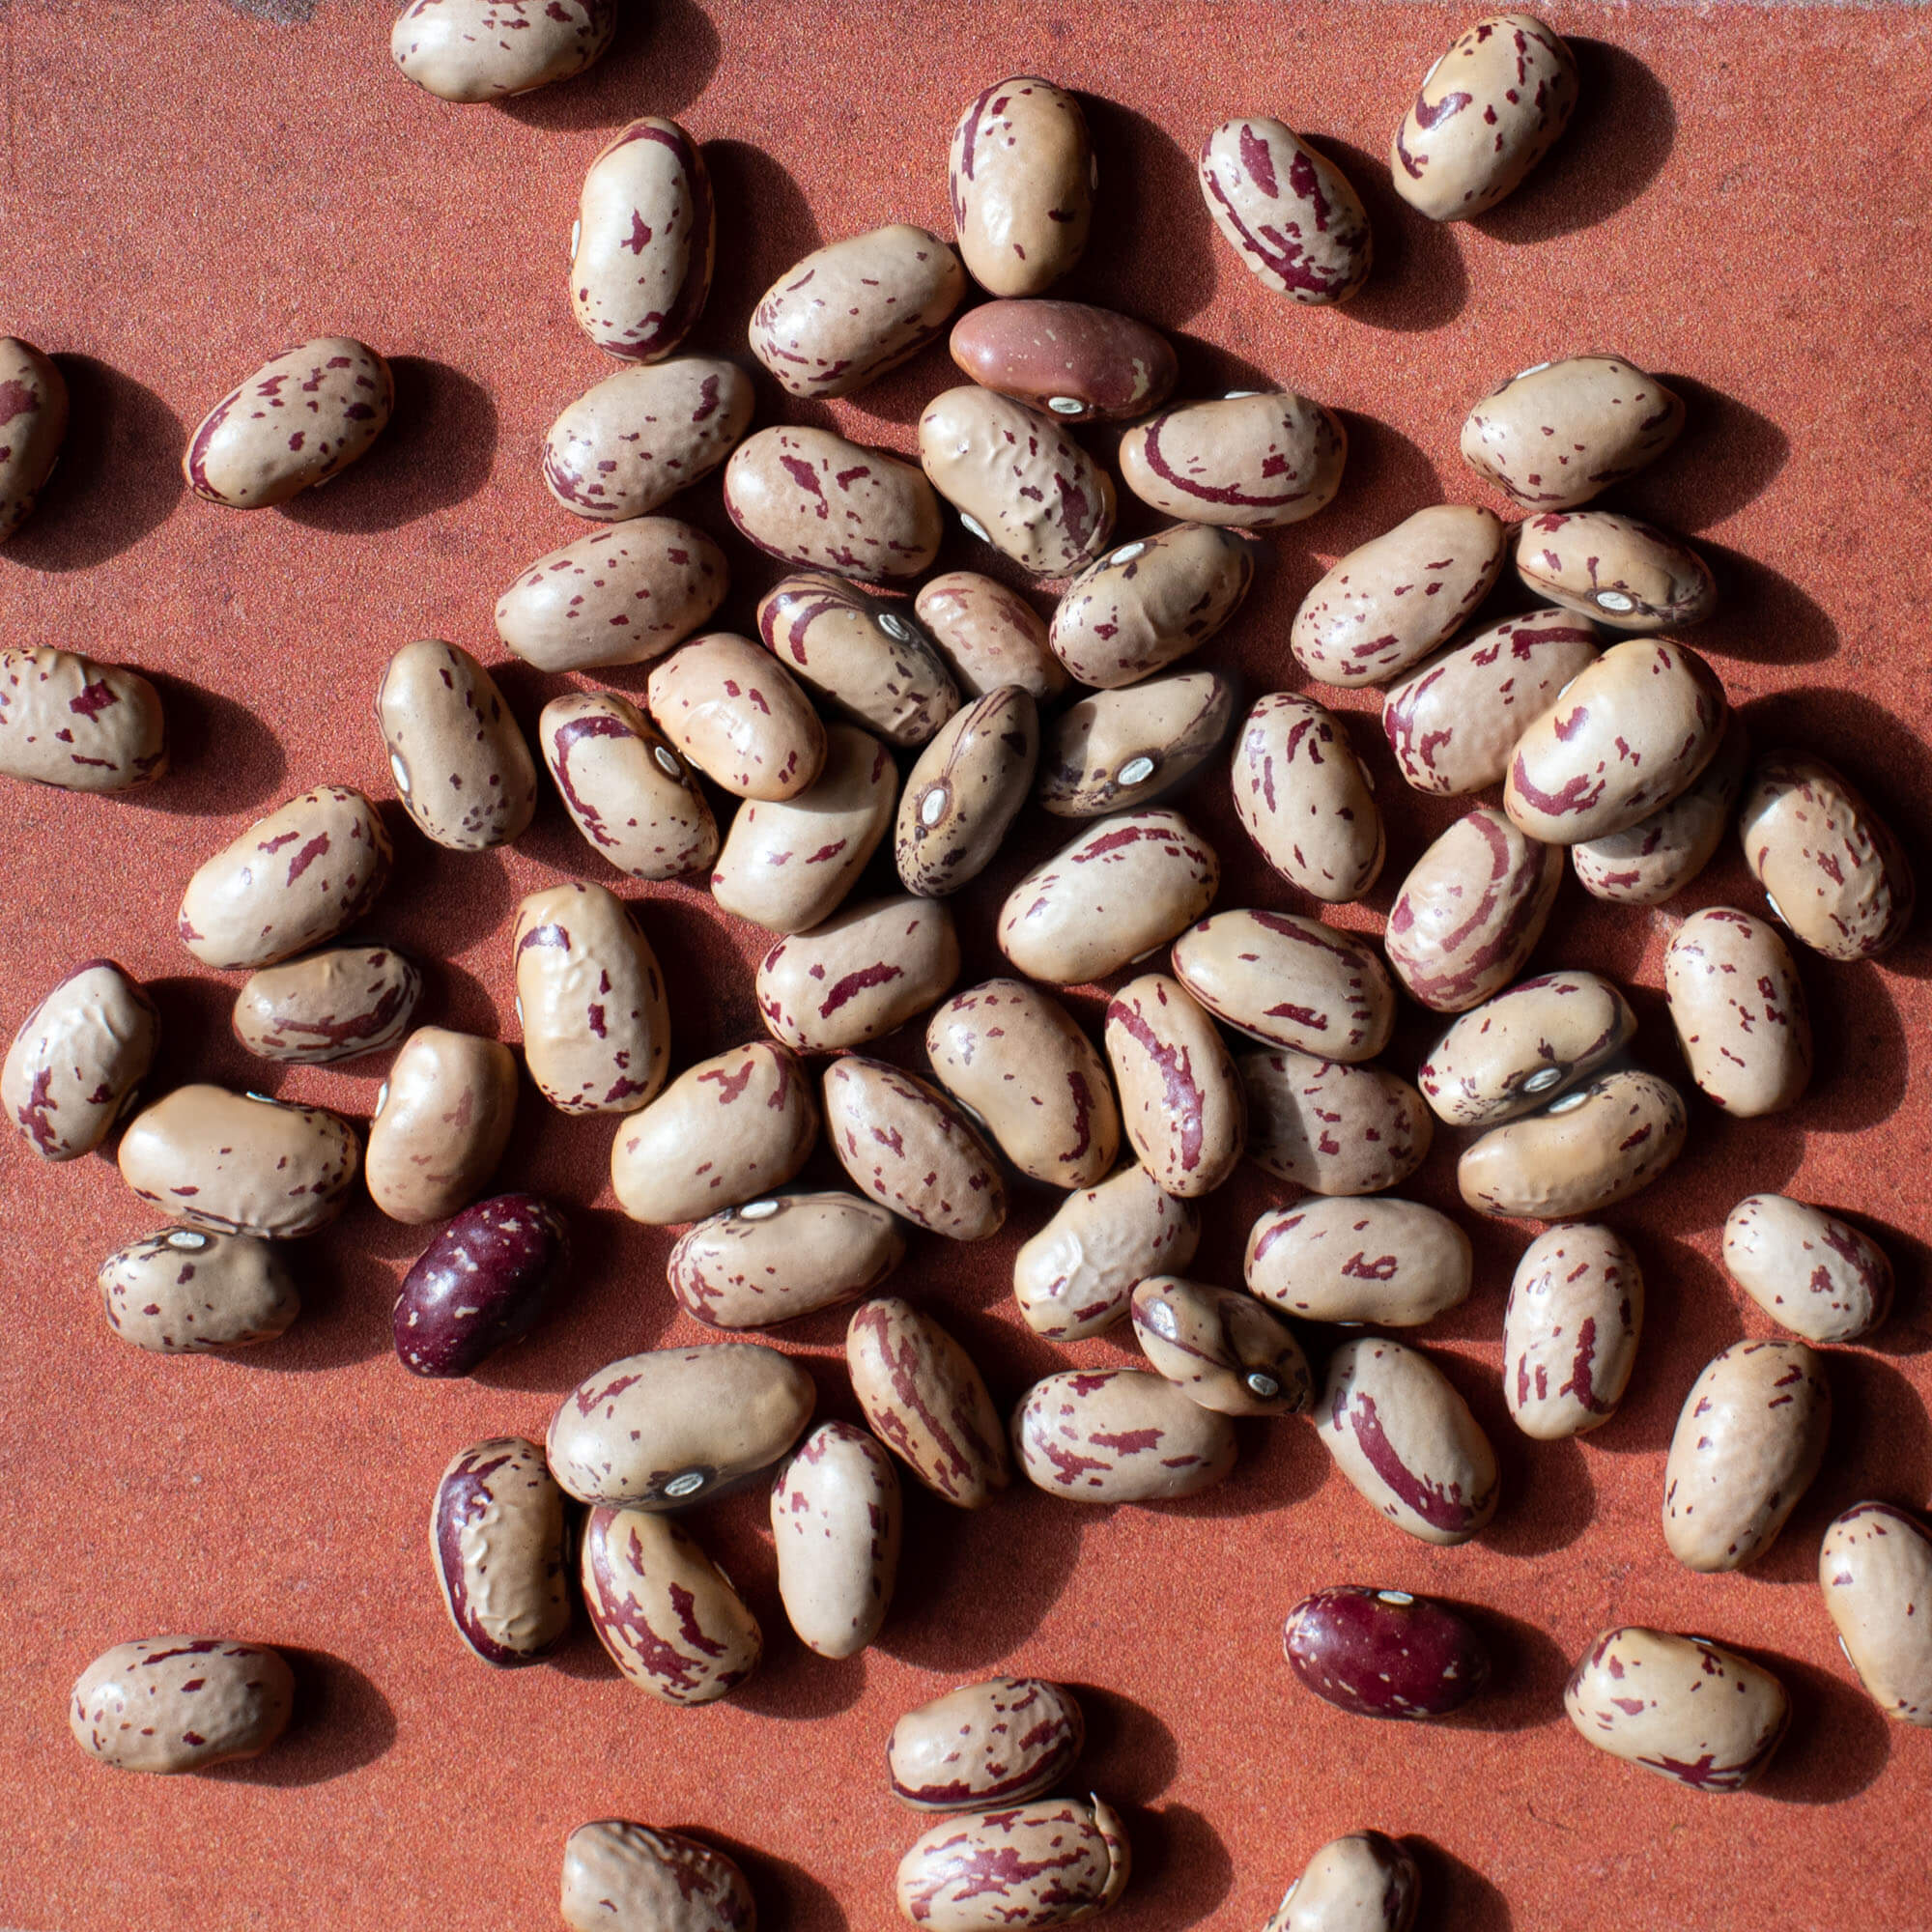 Primary Beans Cranberry beans